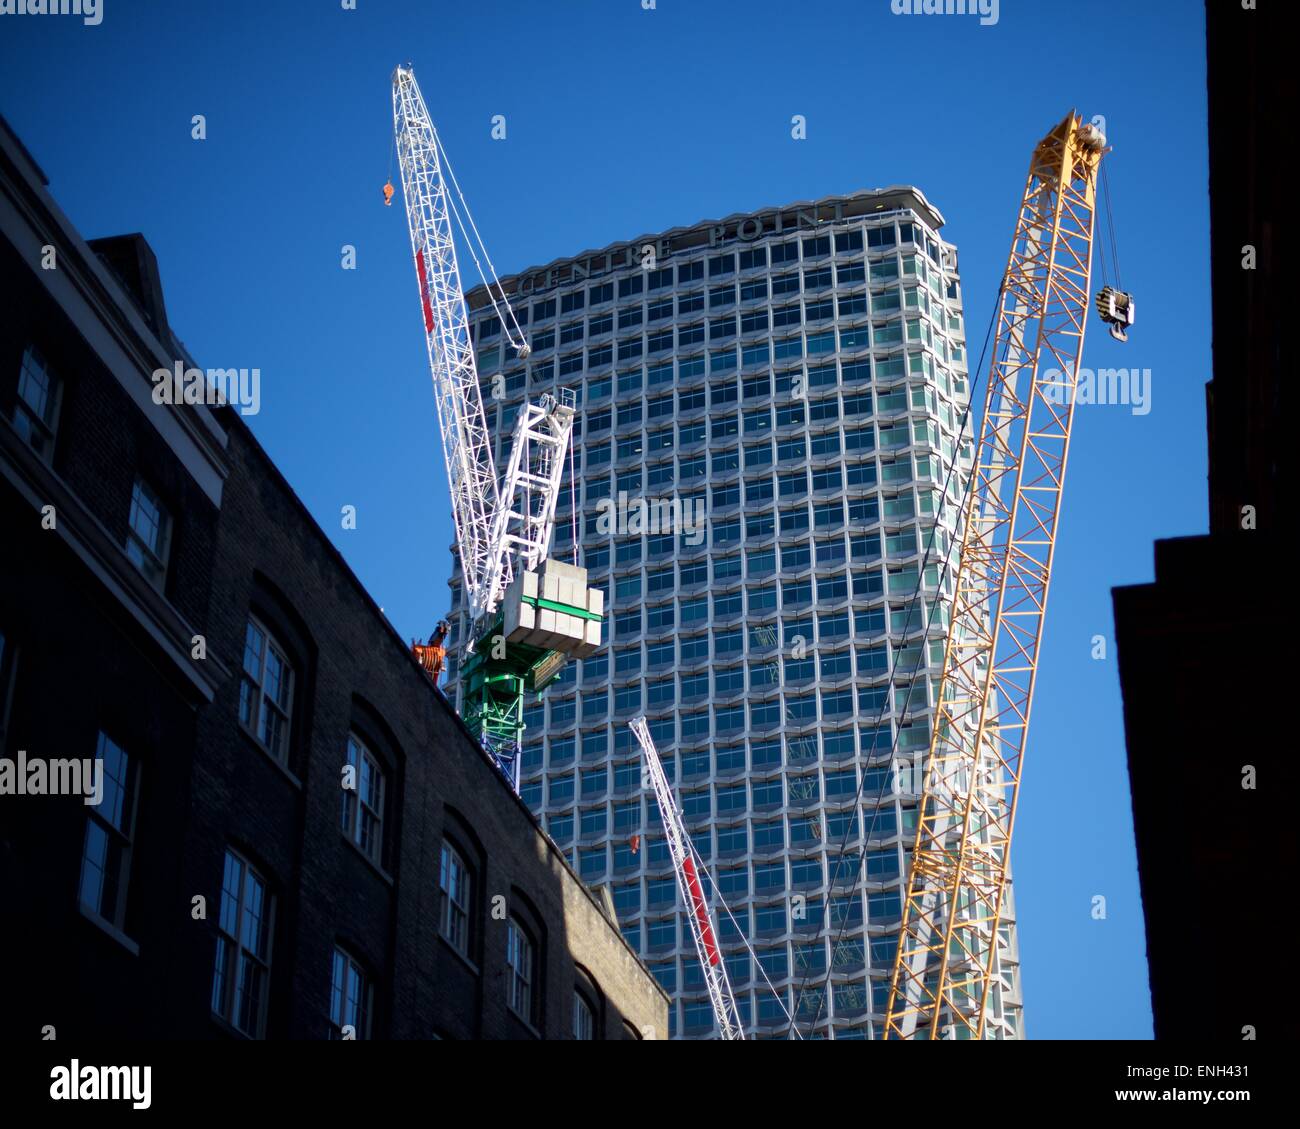 Centrepoint from Soho Square London with cranes Stock Photo